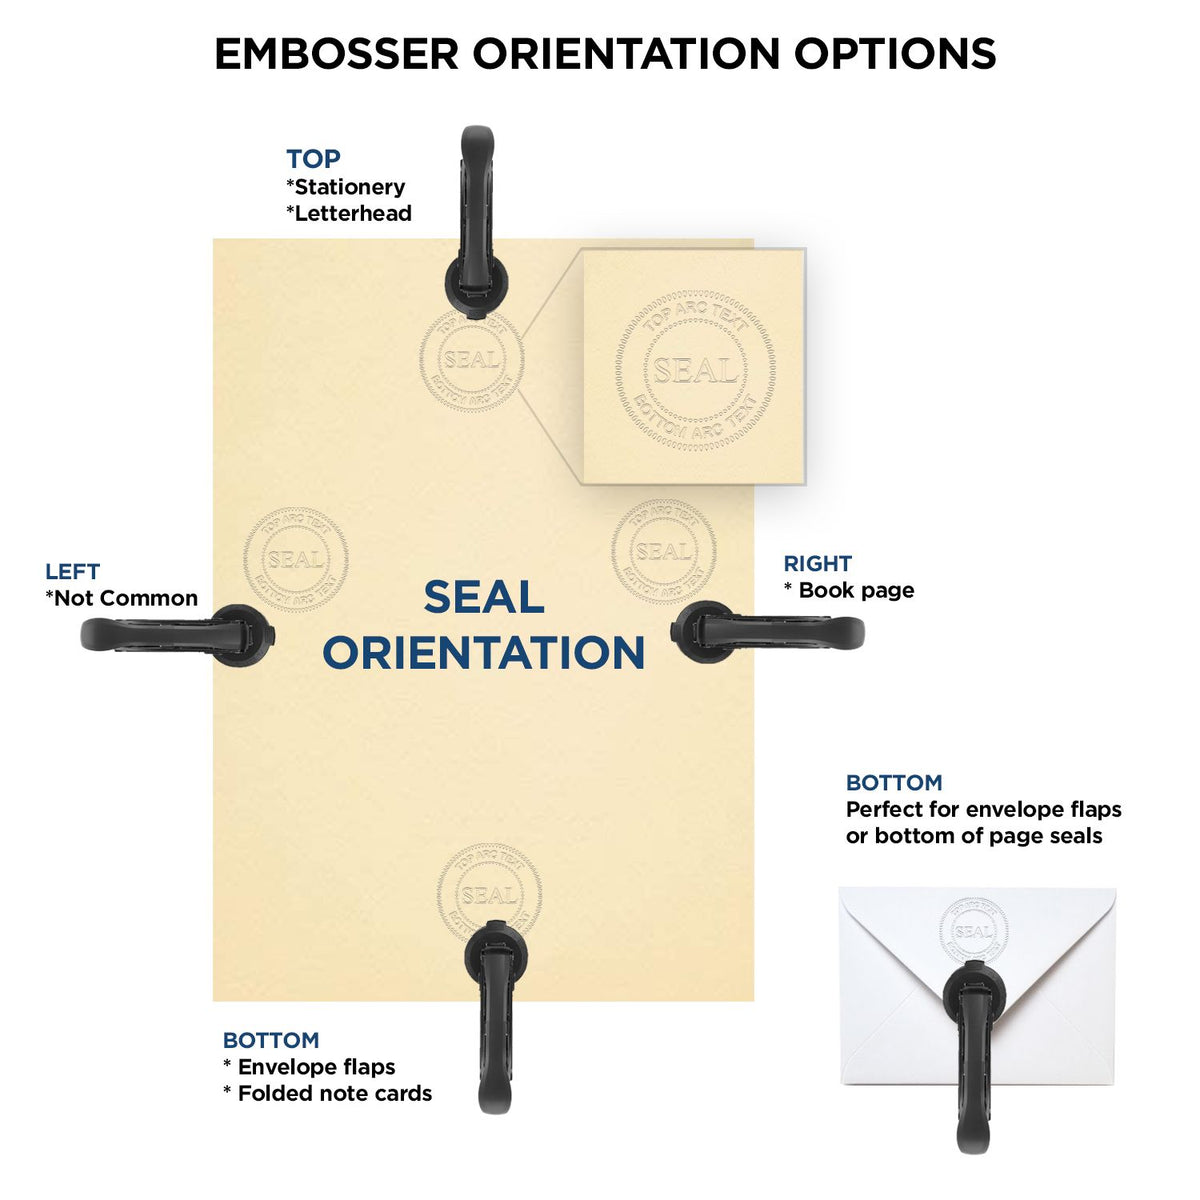 An infographic for the Hybrid Rhode Island Land Surveyor Seal showing embosser orientation, this is showing examples of a top, bottom, right and left insert.